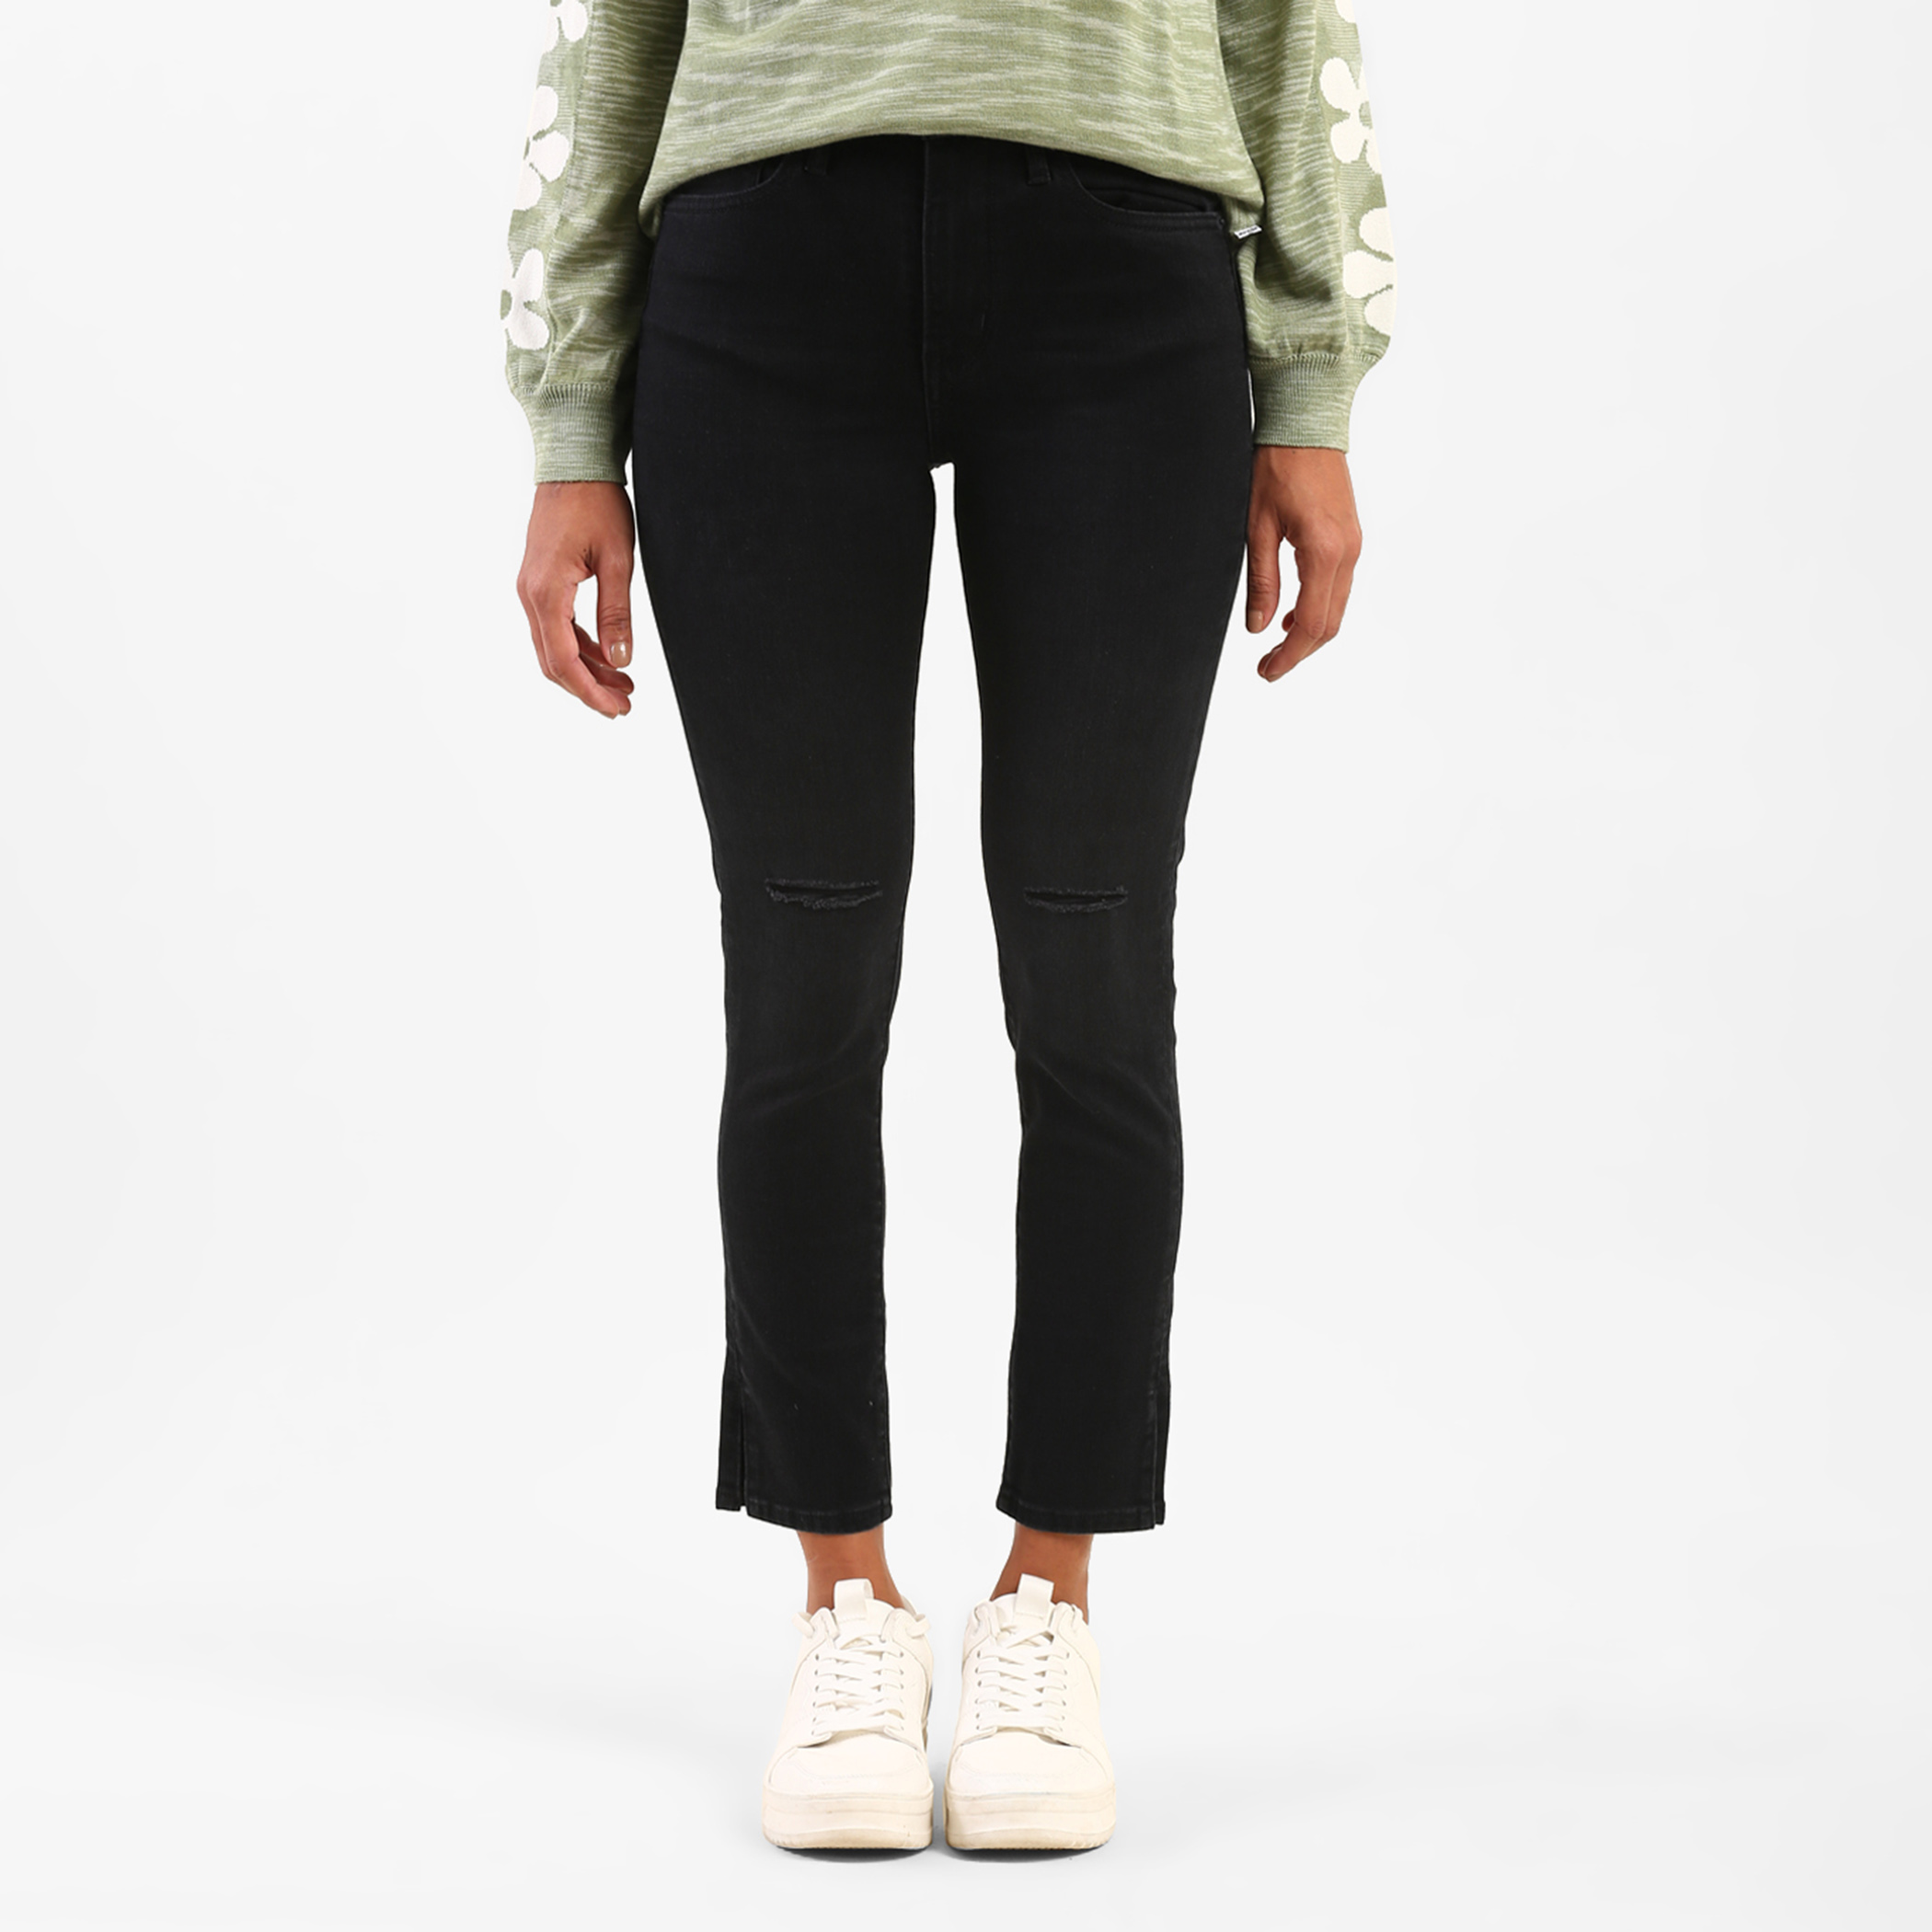 LEVI'S Women Solid Skinny Fit Jeans